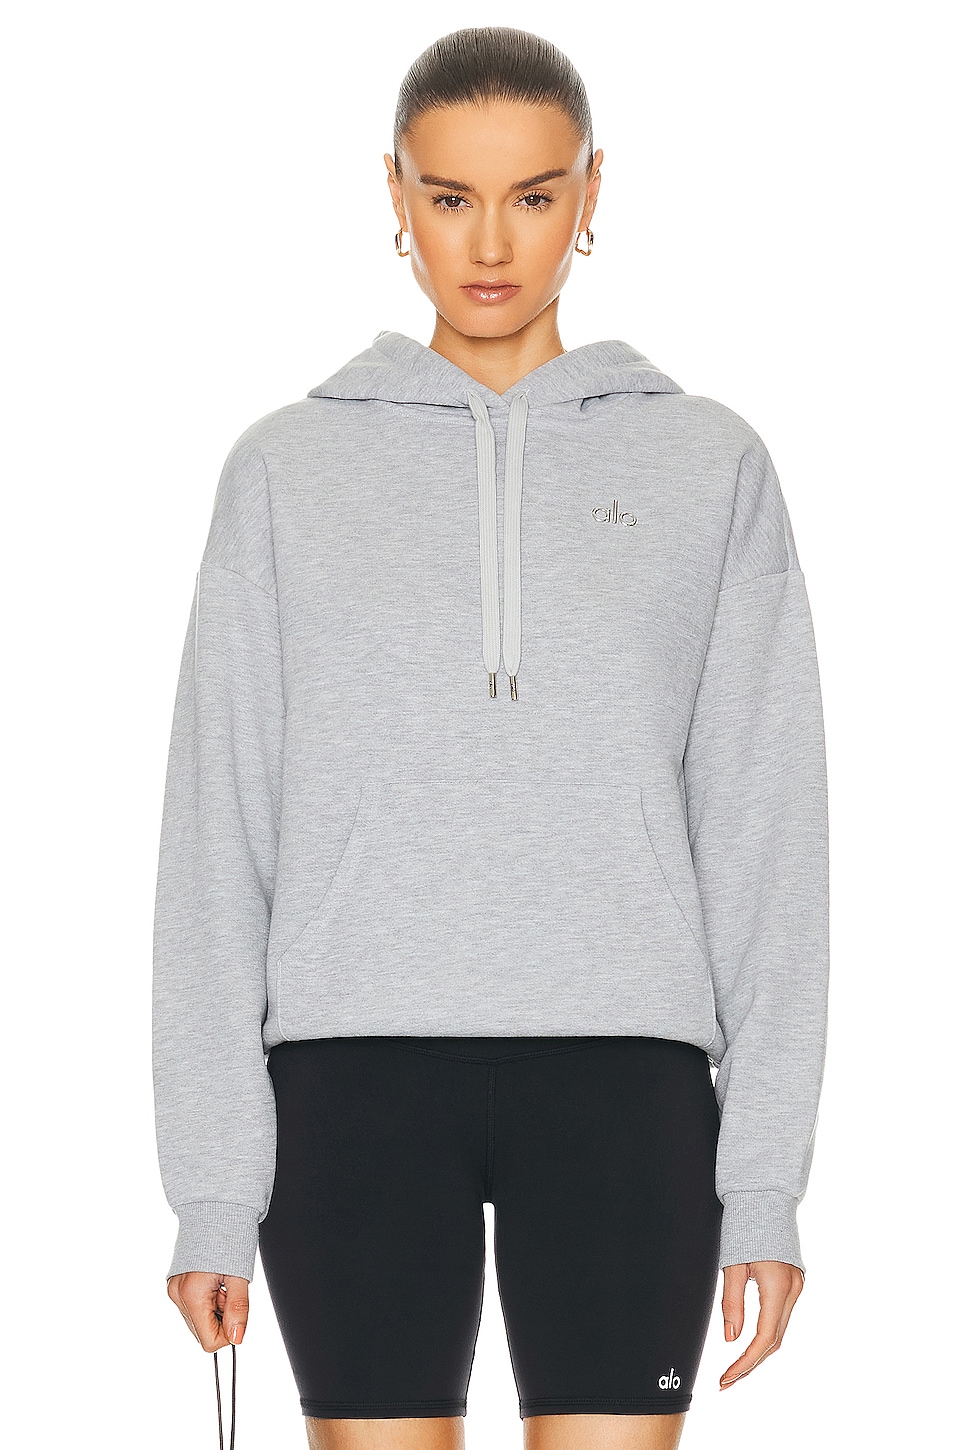 Image 1 of alo Accolade Hoodie in Athletic Heather Grey